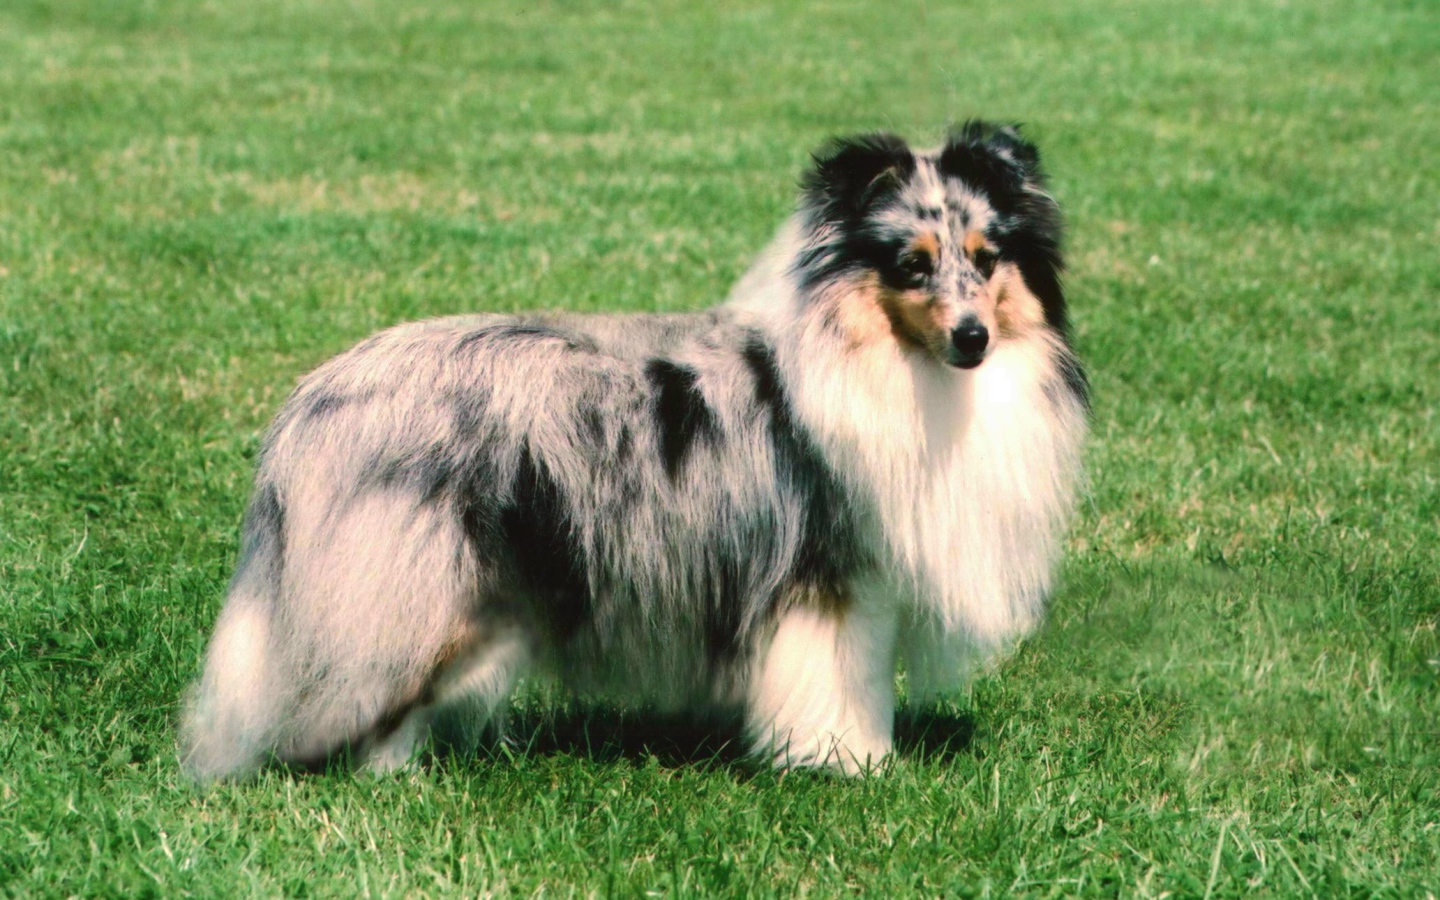 Sheltie breed dog posing on the grass in the summer